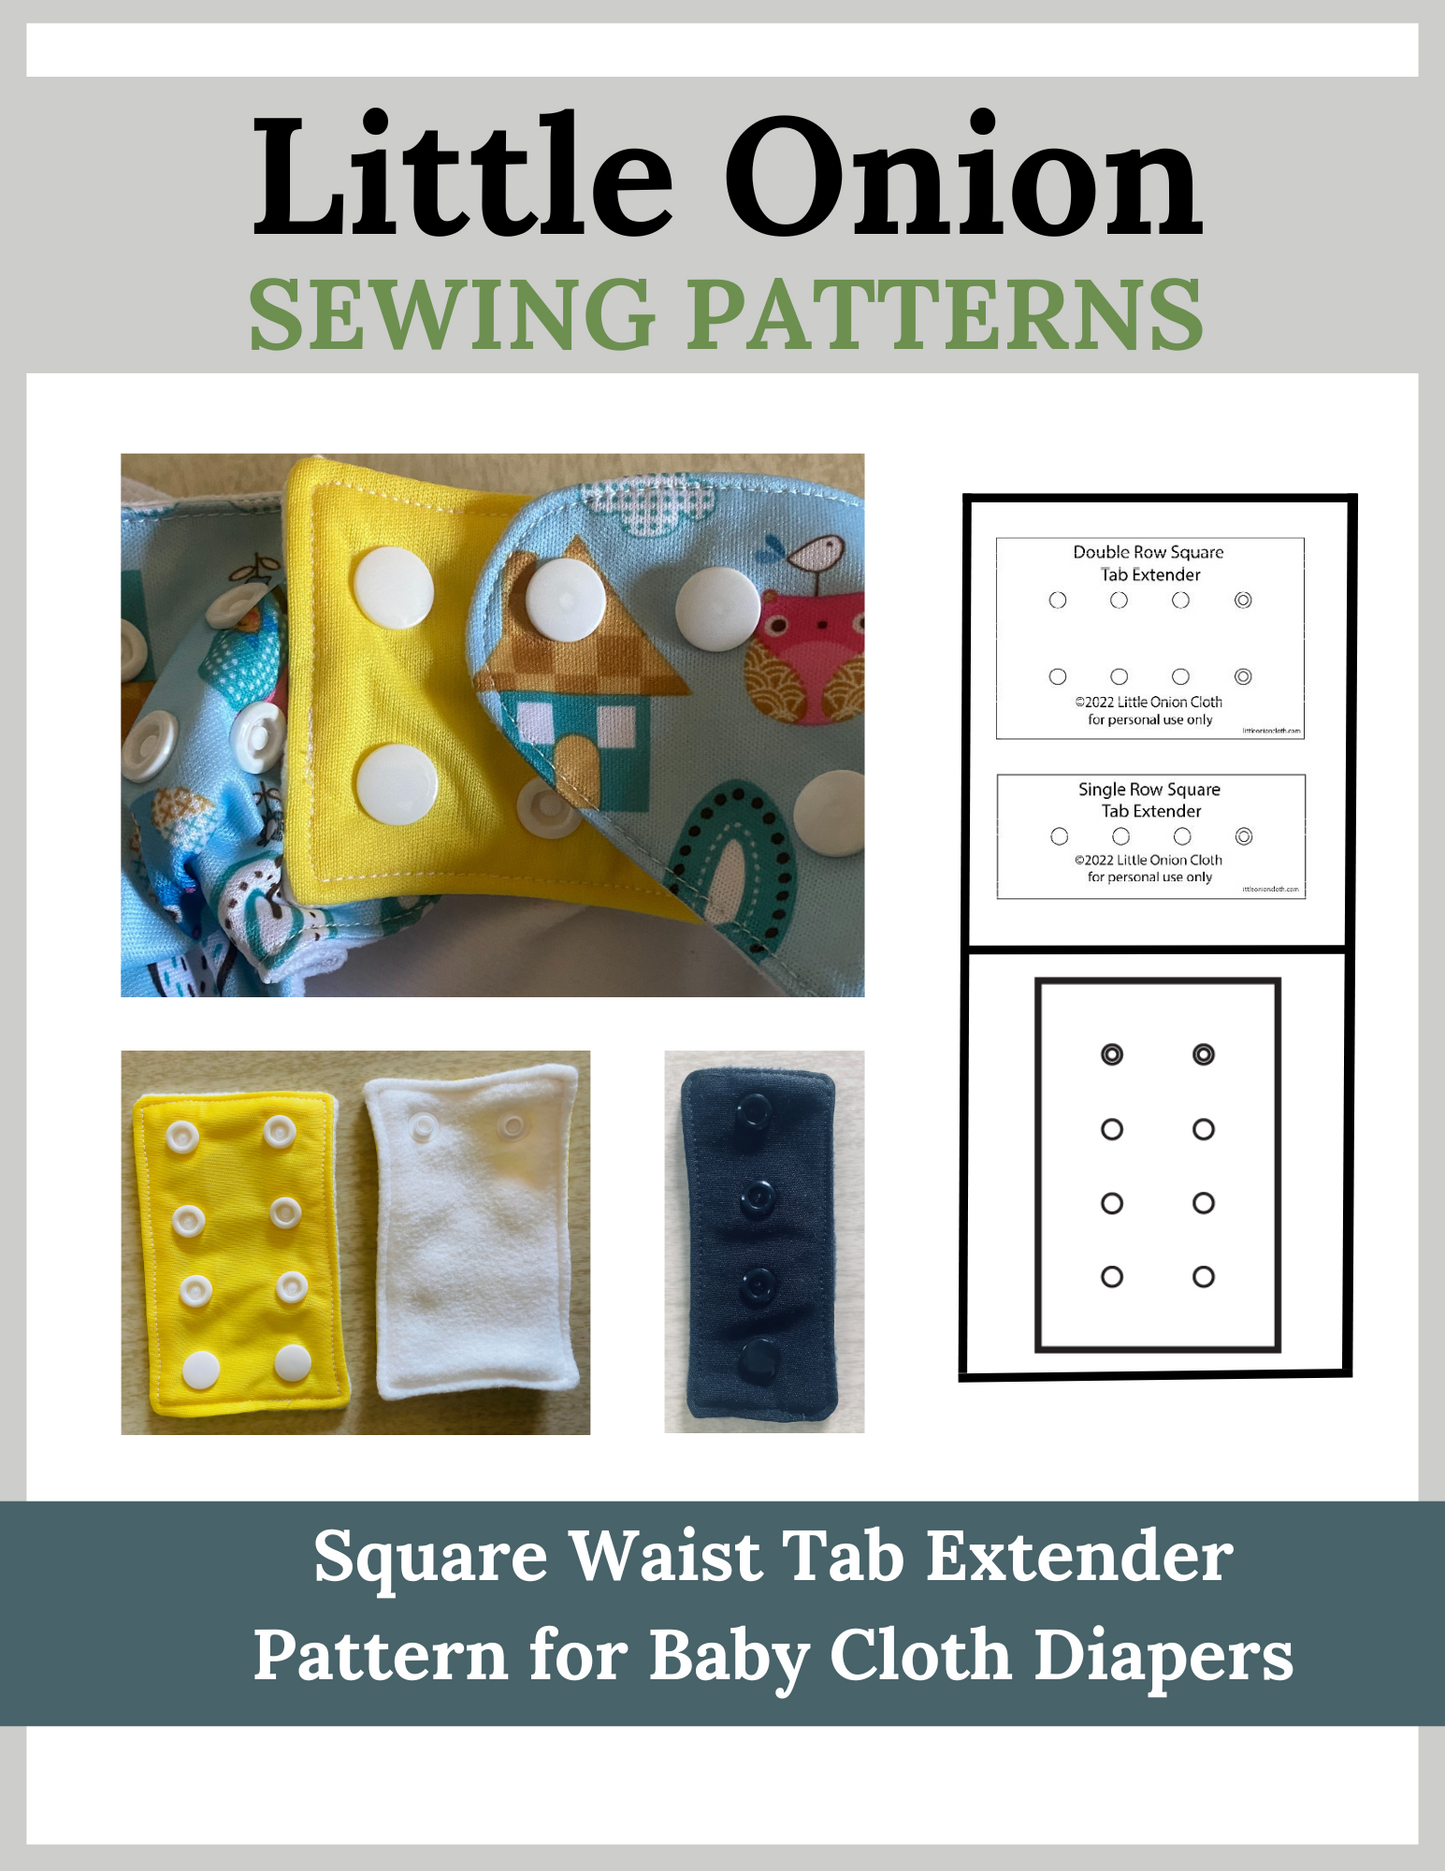 Square Waist Tab Extender Sewing Pattern